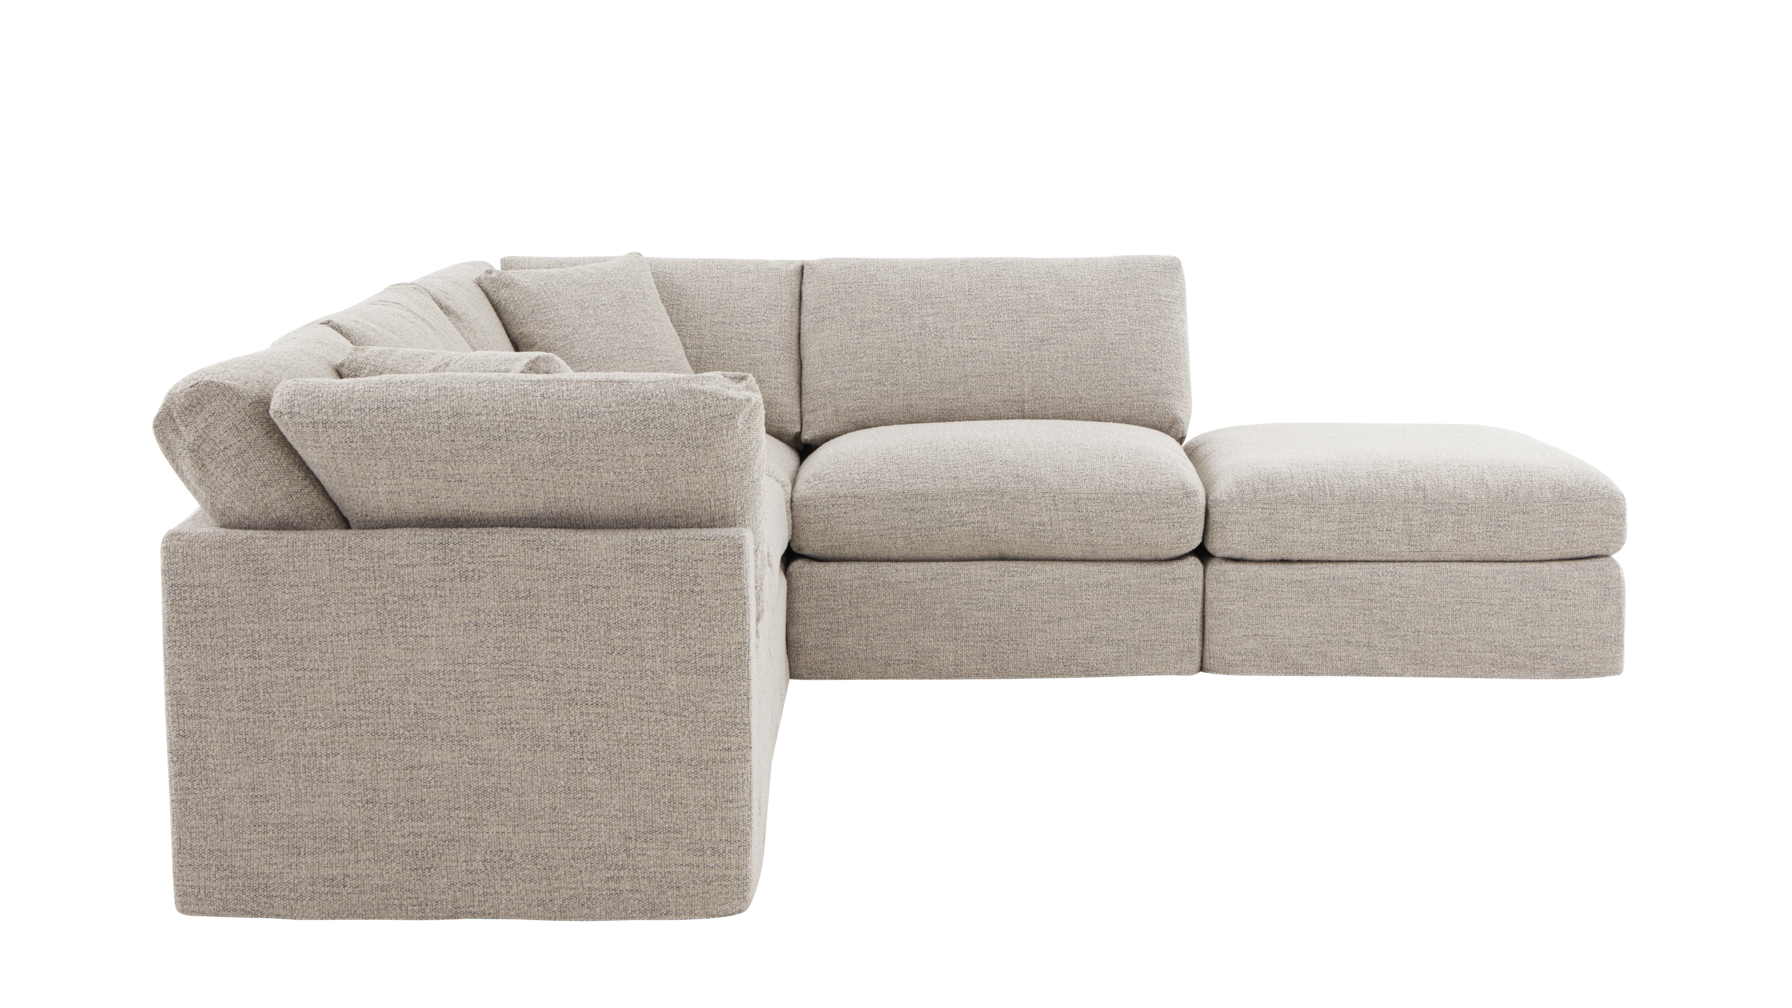 Get Together™ 5-Piece Modular Sectional, Standard, Oatmeal - Image 5